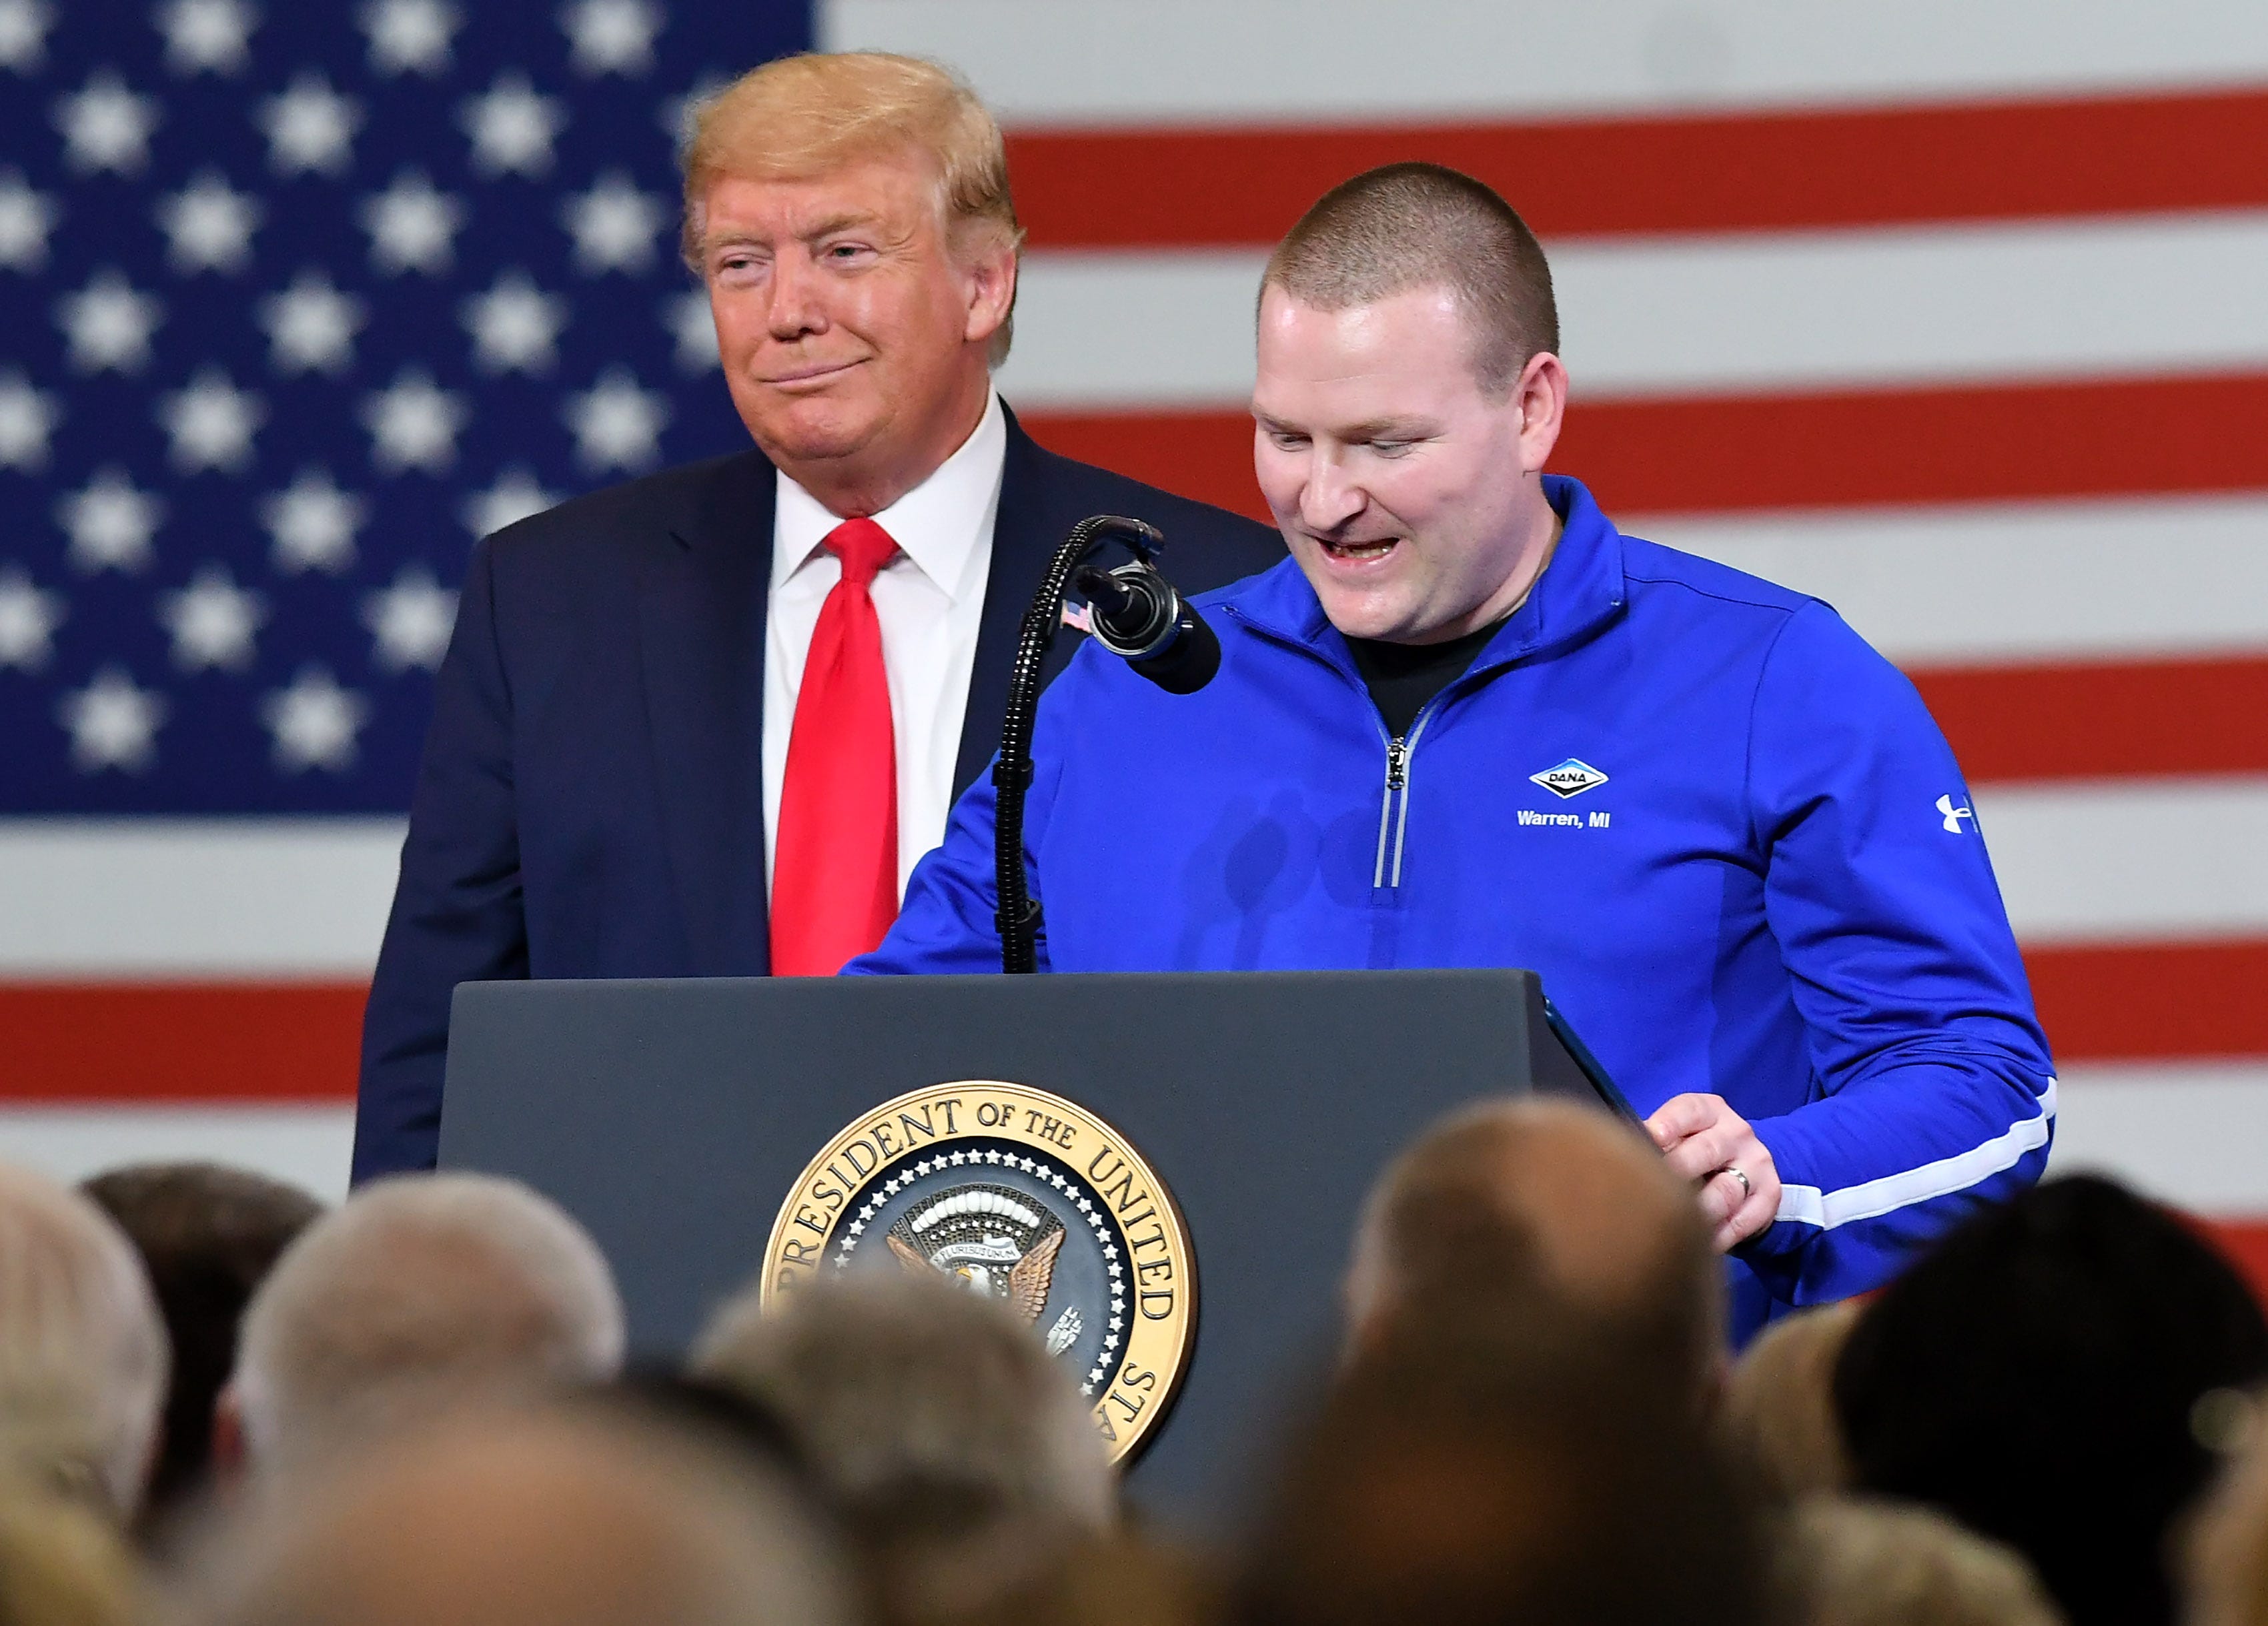 President Donald Trump listens while Dana Incorporated production supervisor and military veteran Devin Mallory, 34, of Washington Township, speaks after the President invited him on stage at Dana Incorporated in Warren, Mich. on Jan. 30, 2020.